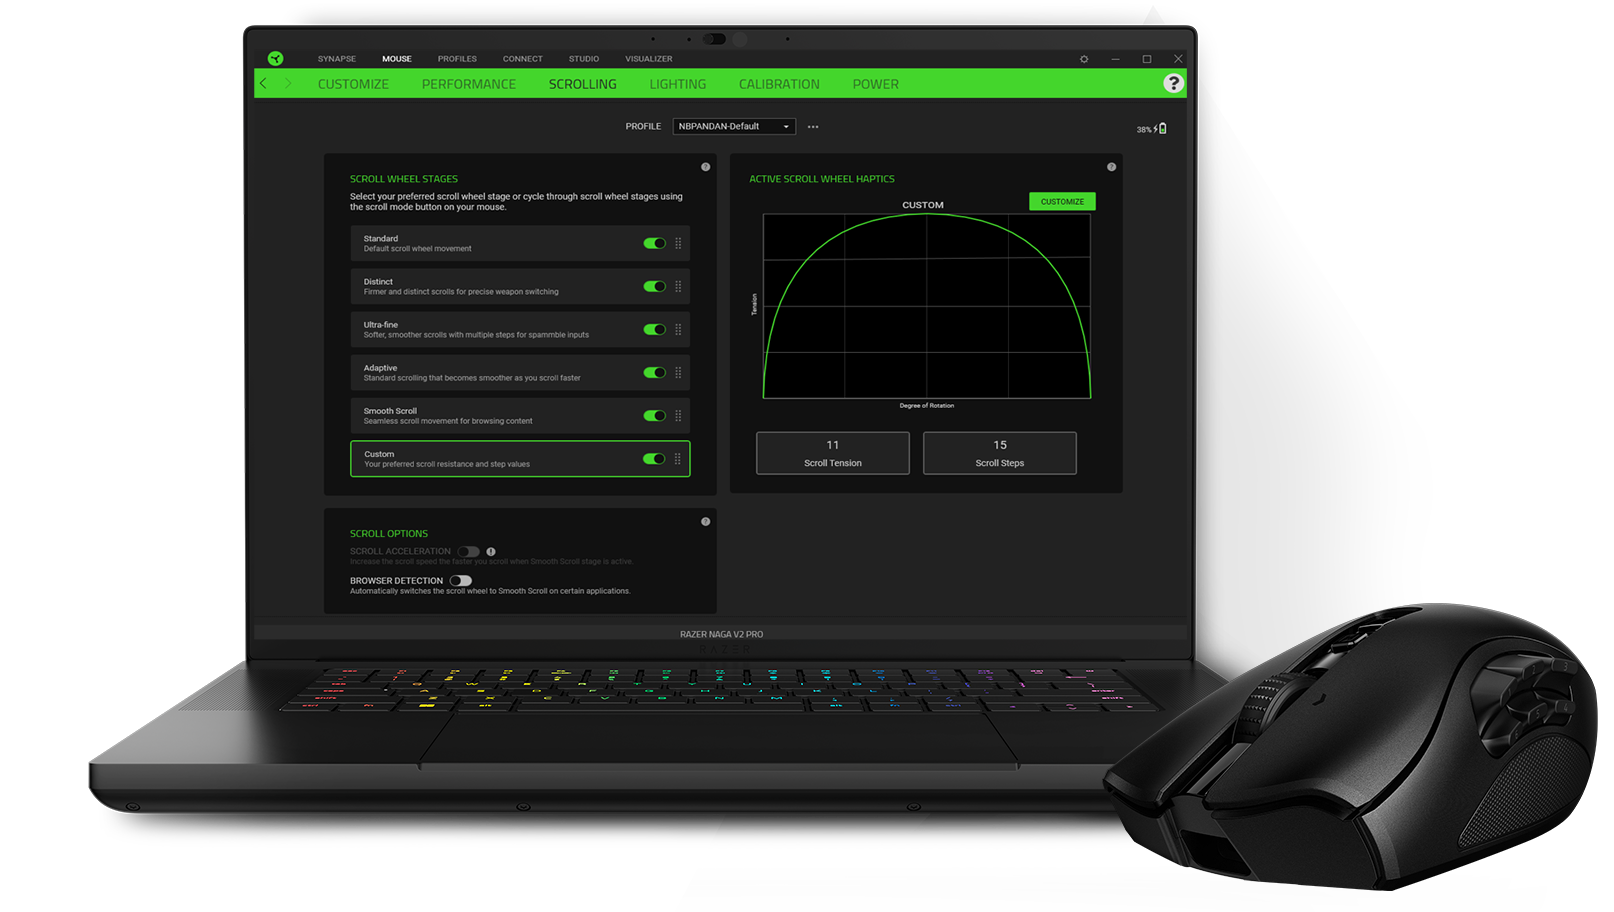 he illustration shows the Razer Naga V2 Pro with HyperScroll Pro Wheel powered by XeelTech, as well as a notebook with Razer's Synapse software to customize the haptic feedback of the scroll wheel.